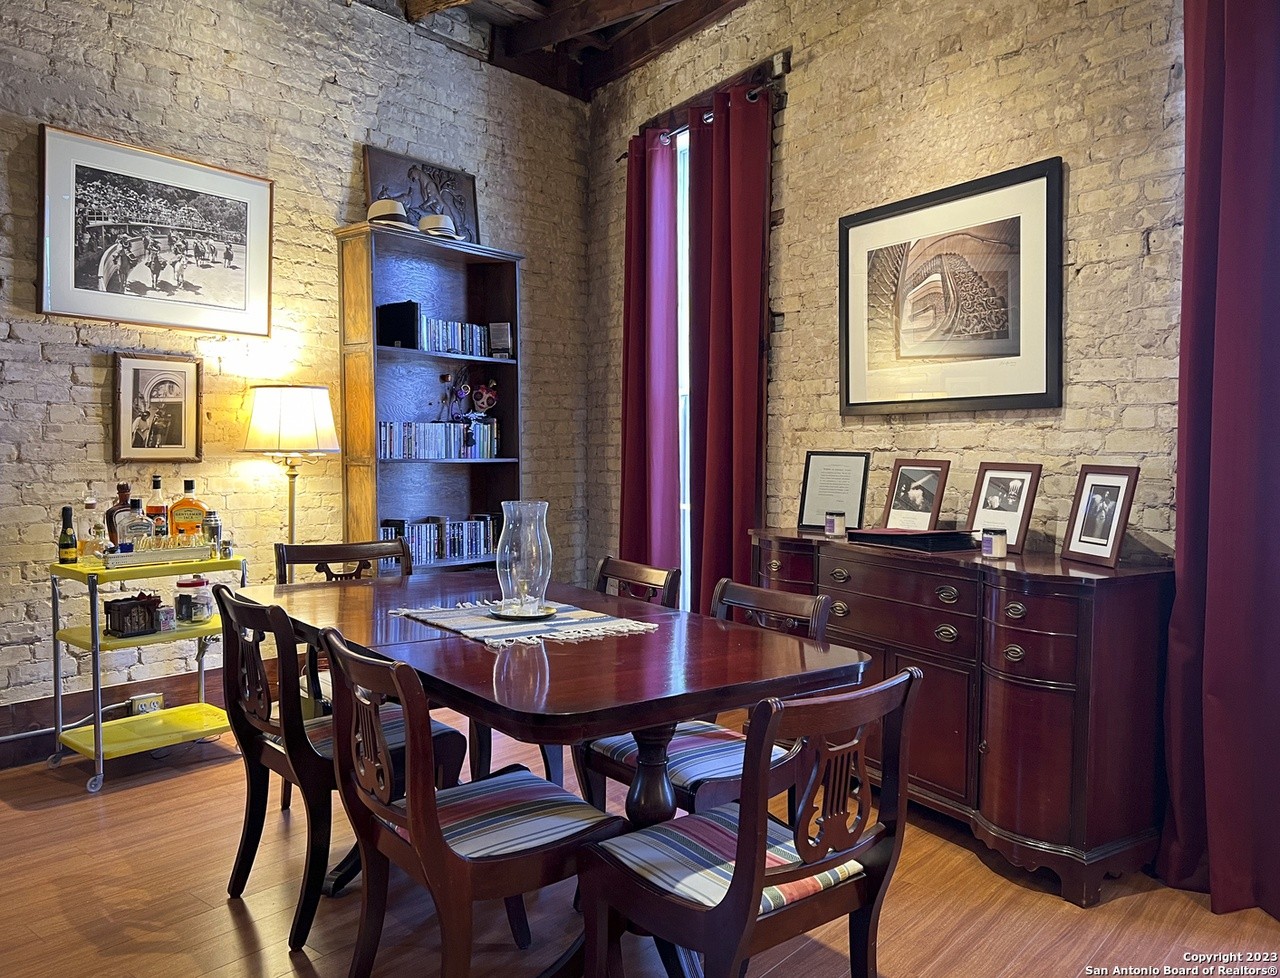 Renowned San Antonio photographer Al Rendon is selling his 1892 studio and living space